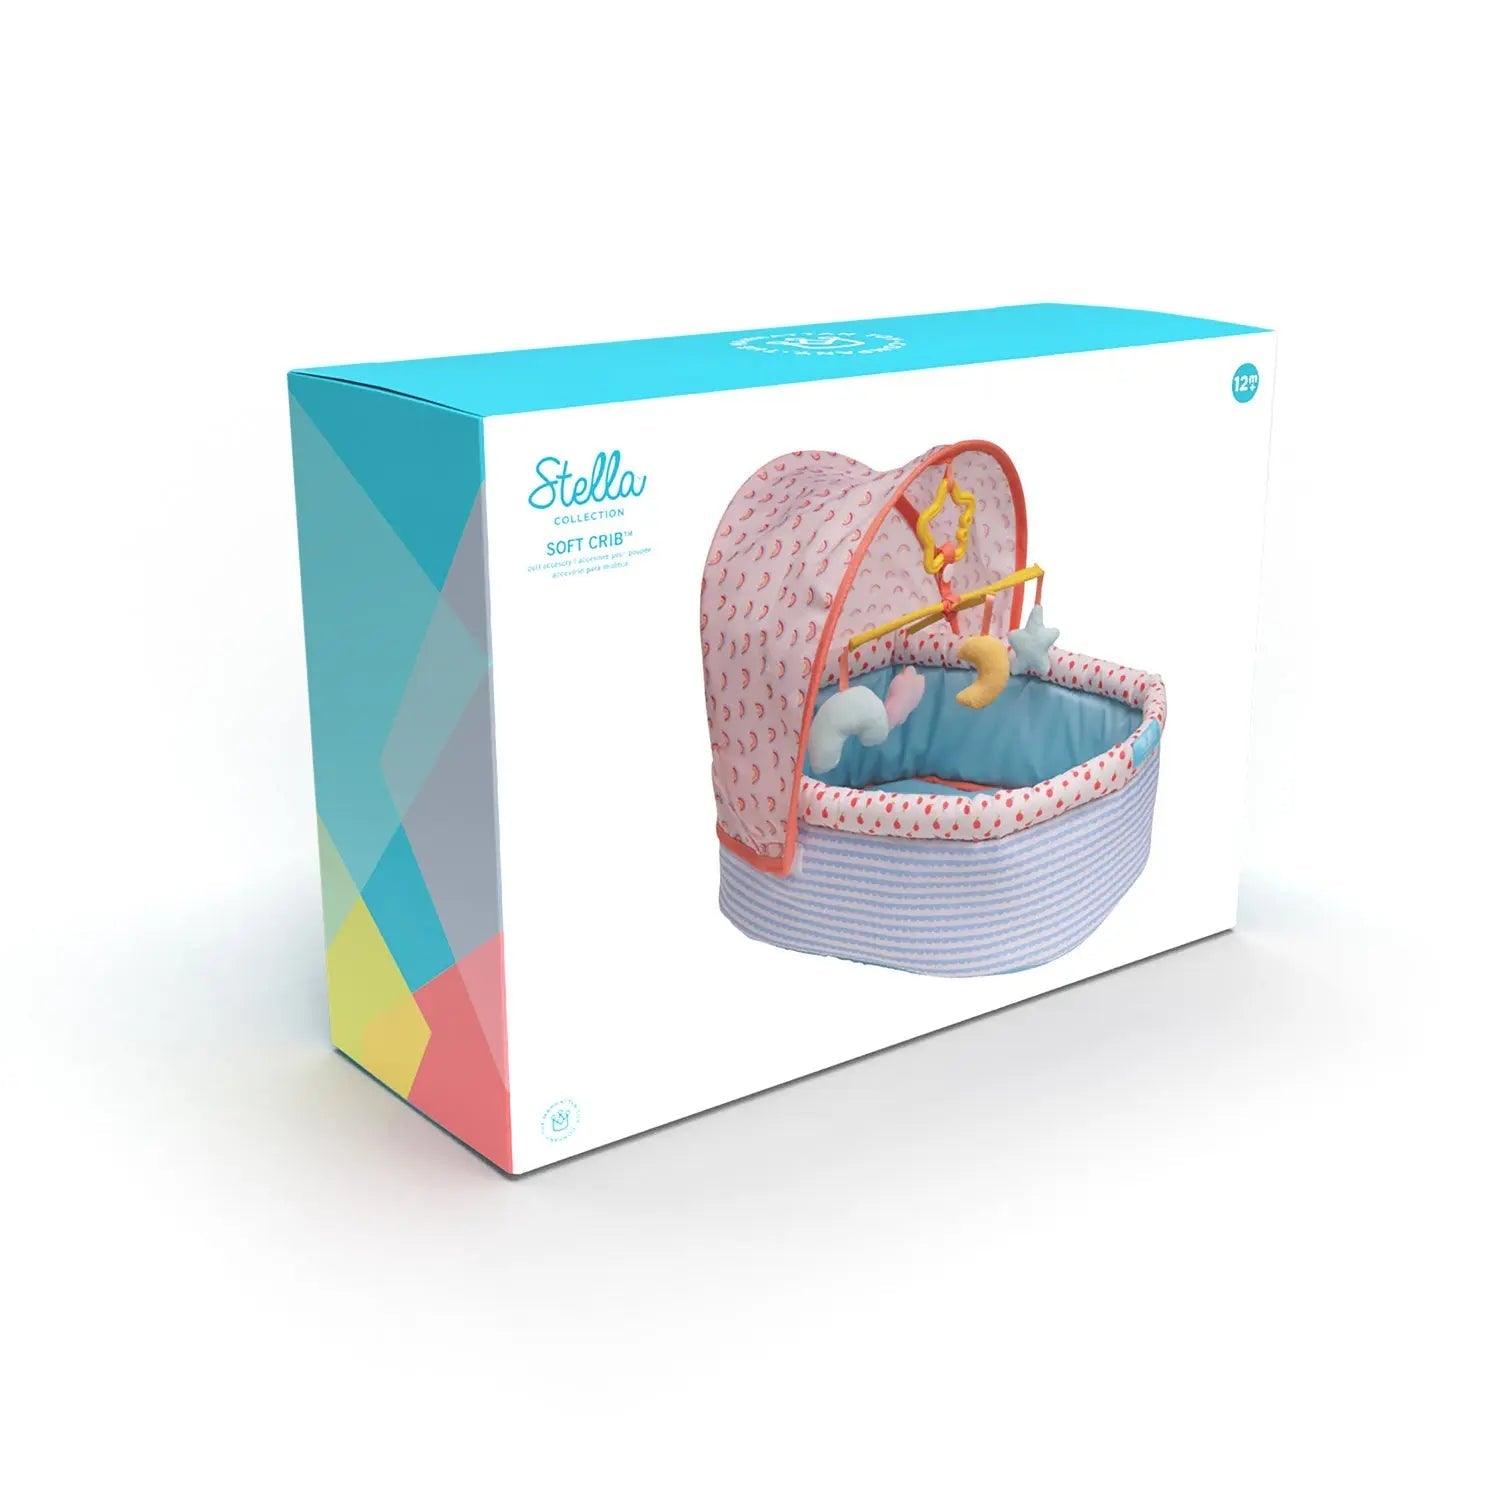 Stella Collection Soft Crib - Why and Whale